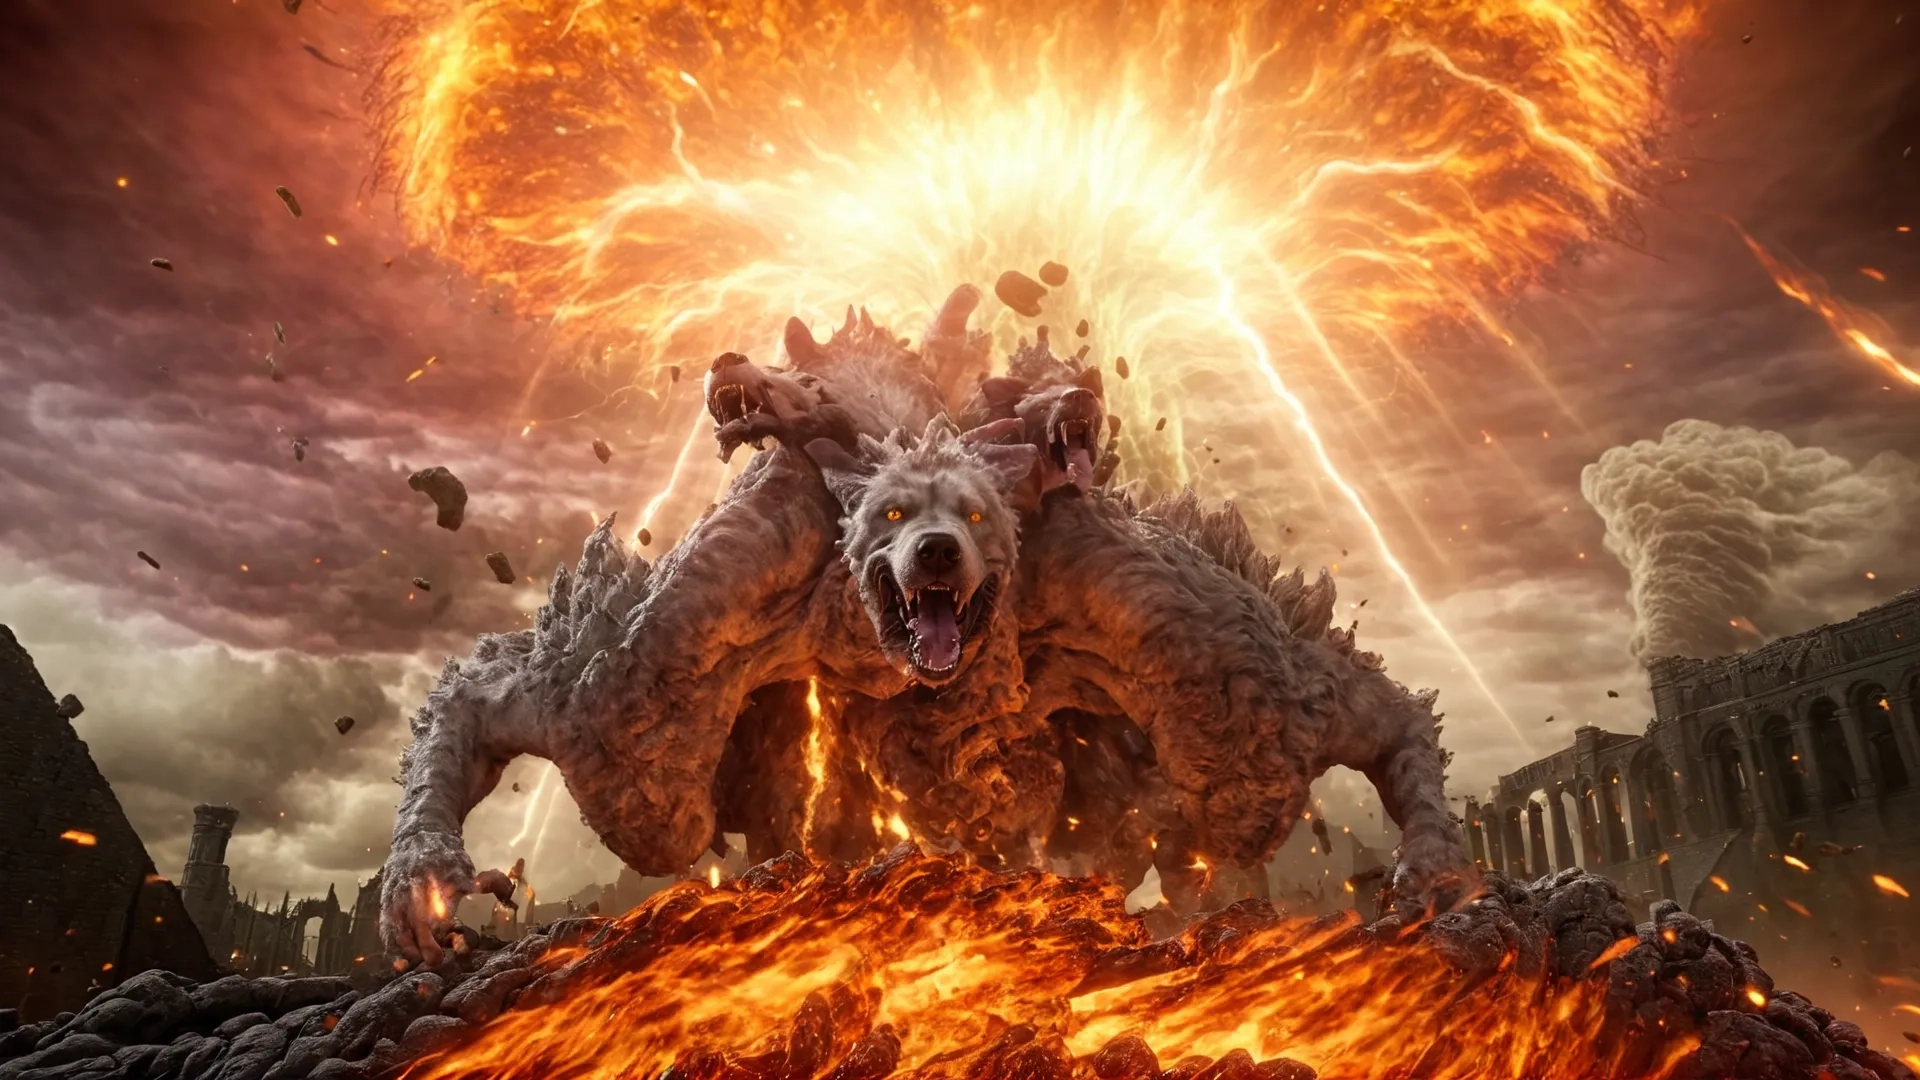 demonic monster with huge fiery explosion and lava lava
